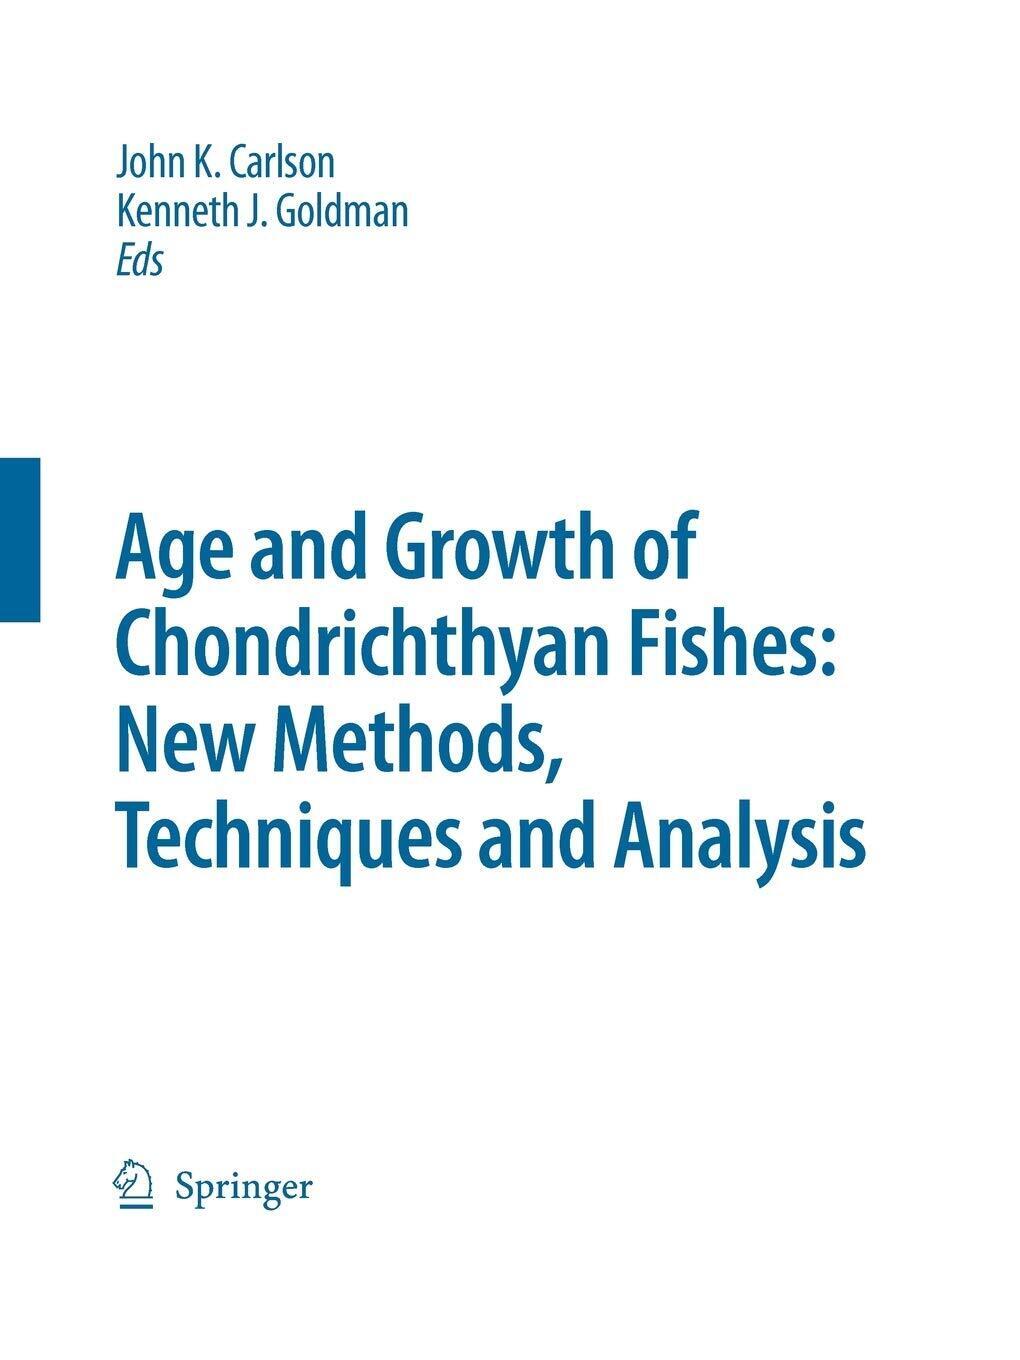 Special Issue: Age and Growth of Chondrichthyan Fishes: New Methods, Techniques 